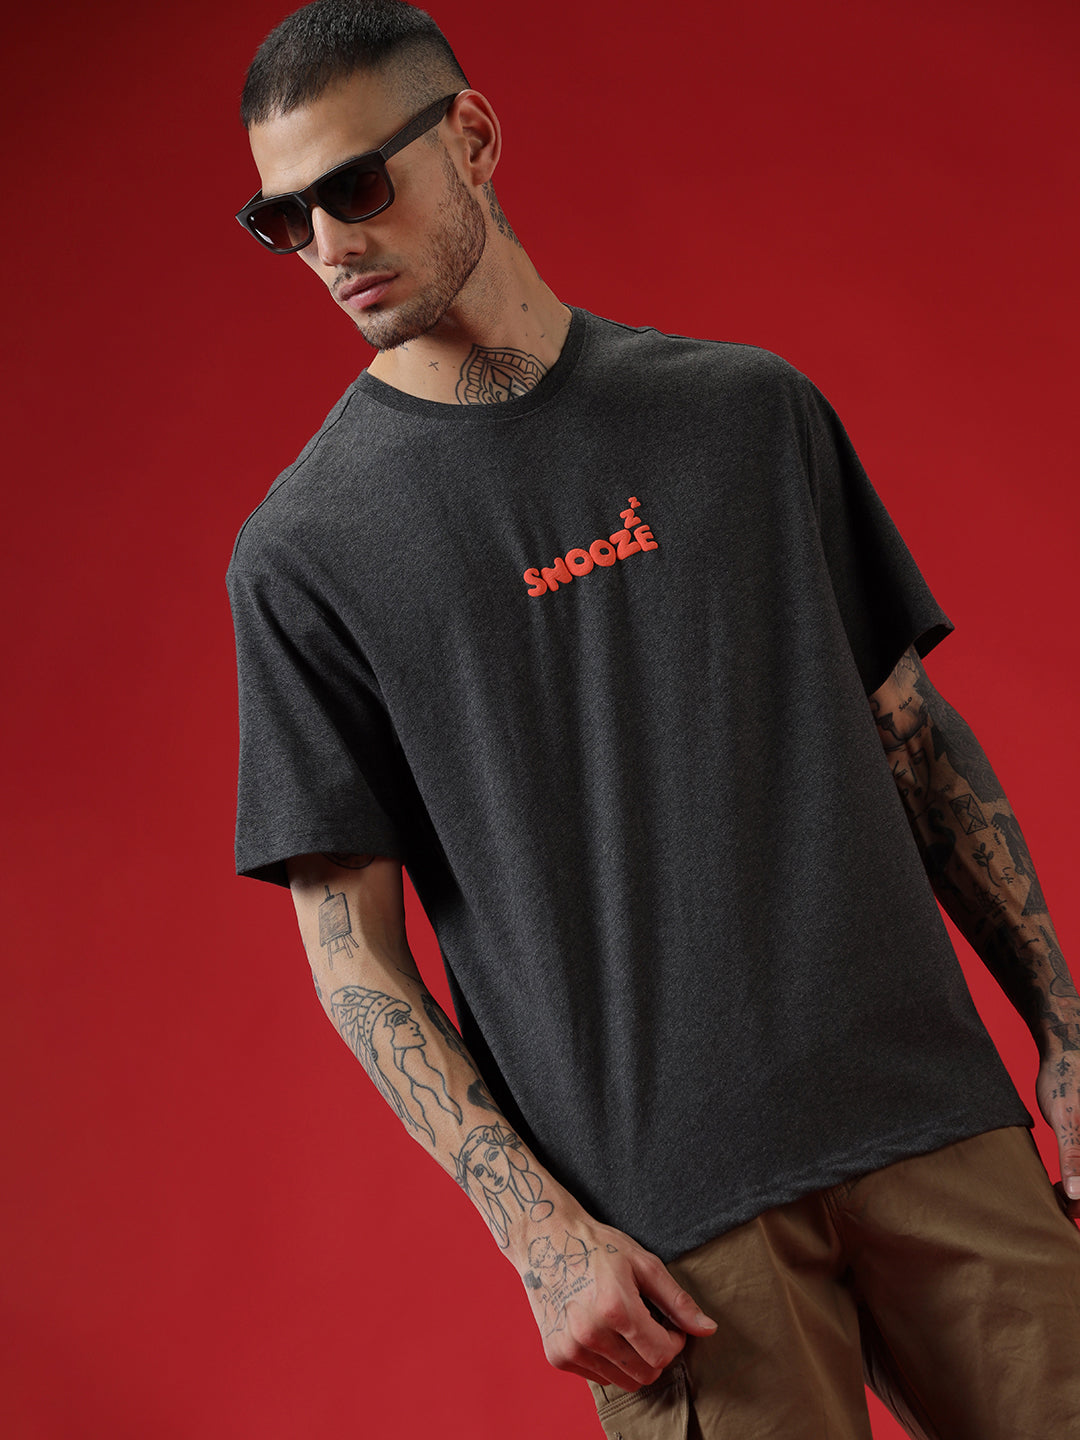 Snooze Oversized Charcoal T-Shirt